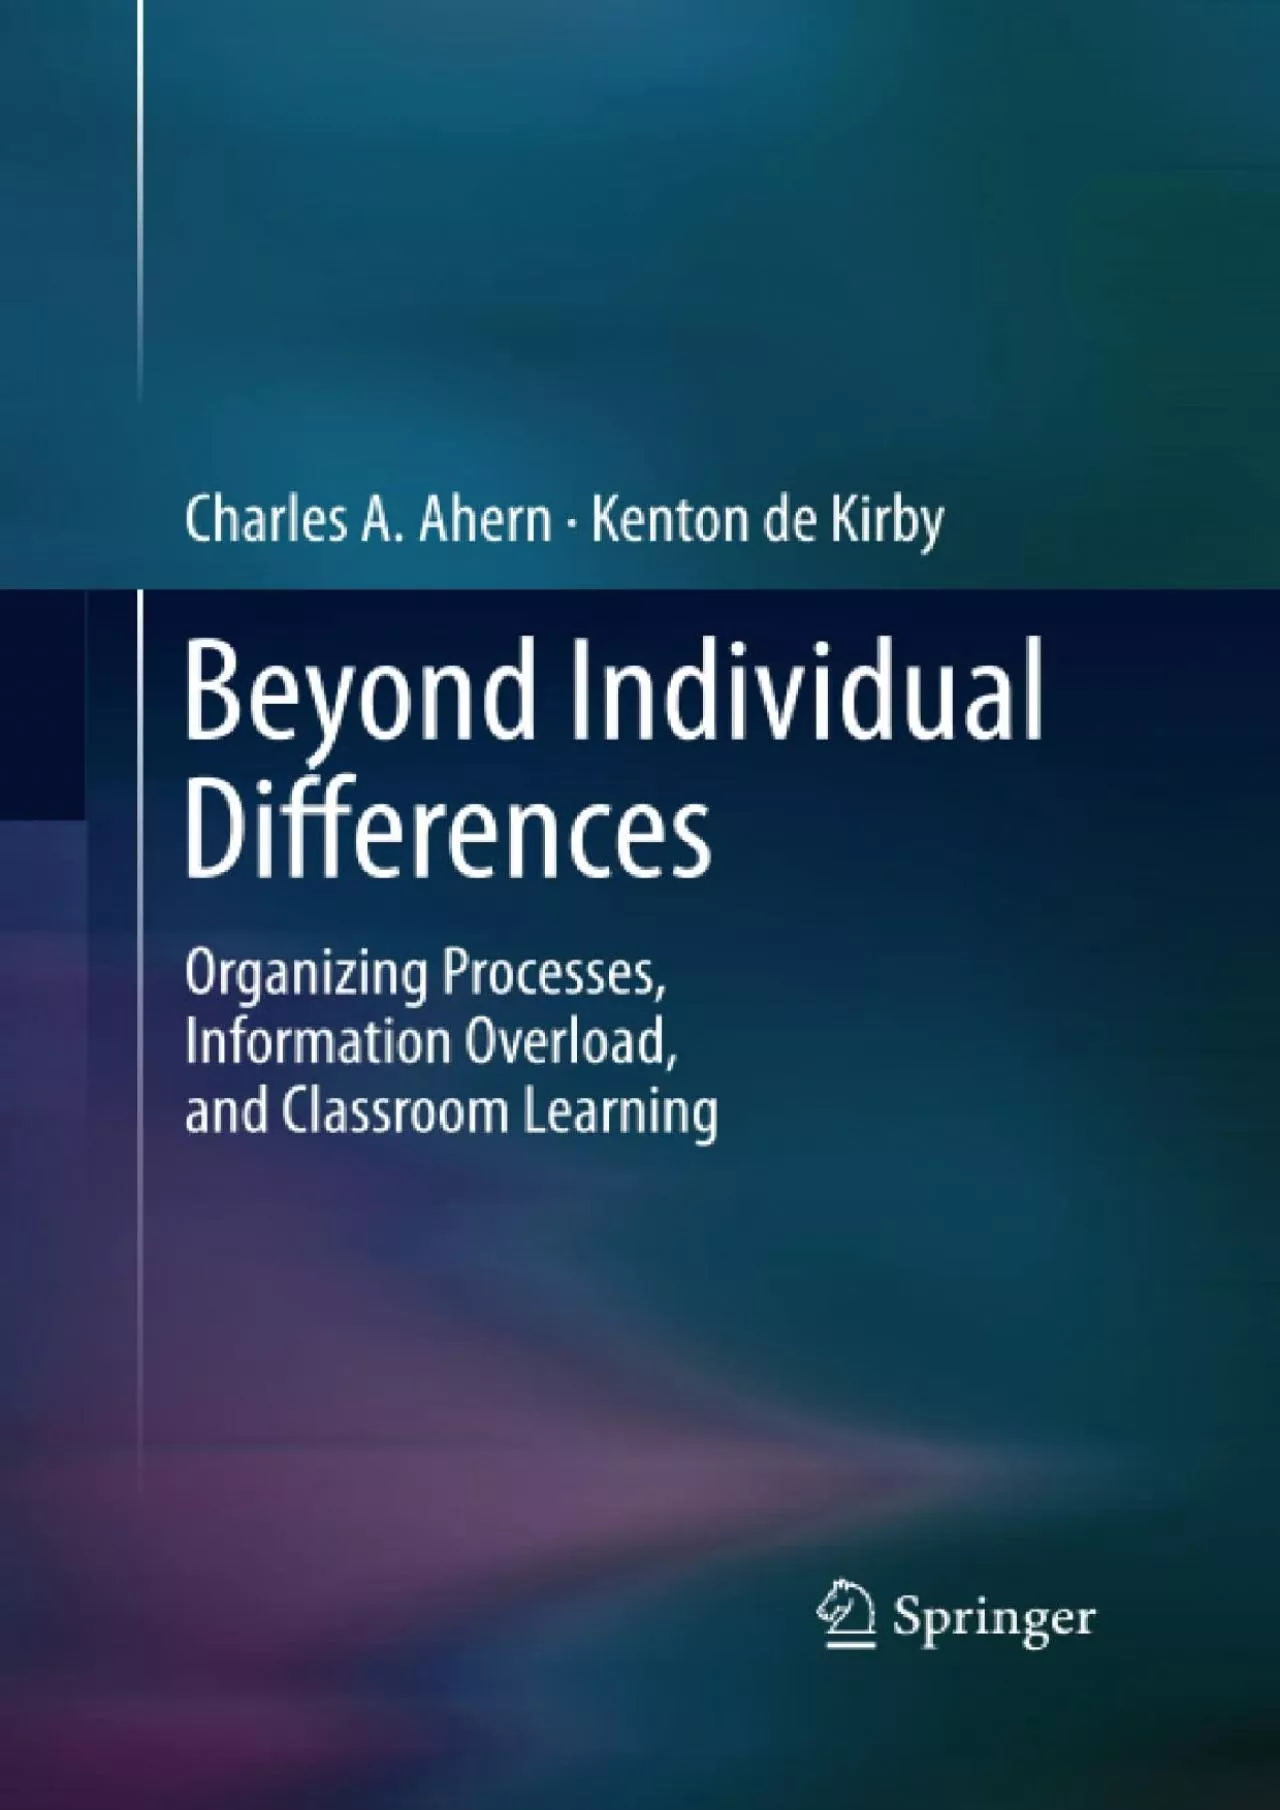 (EBOOK)-Beyond Individual Differences: Organizing Processes, Information Overload, and